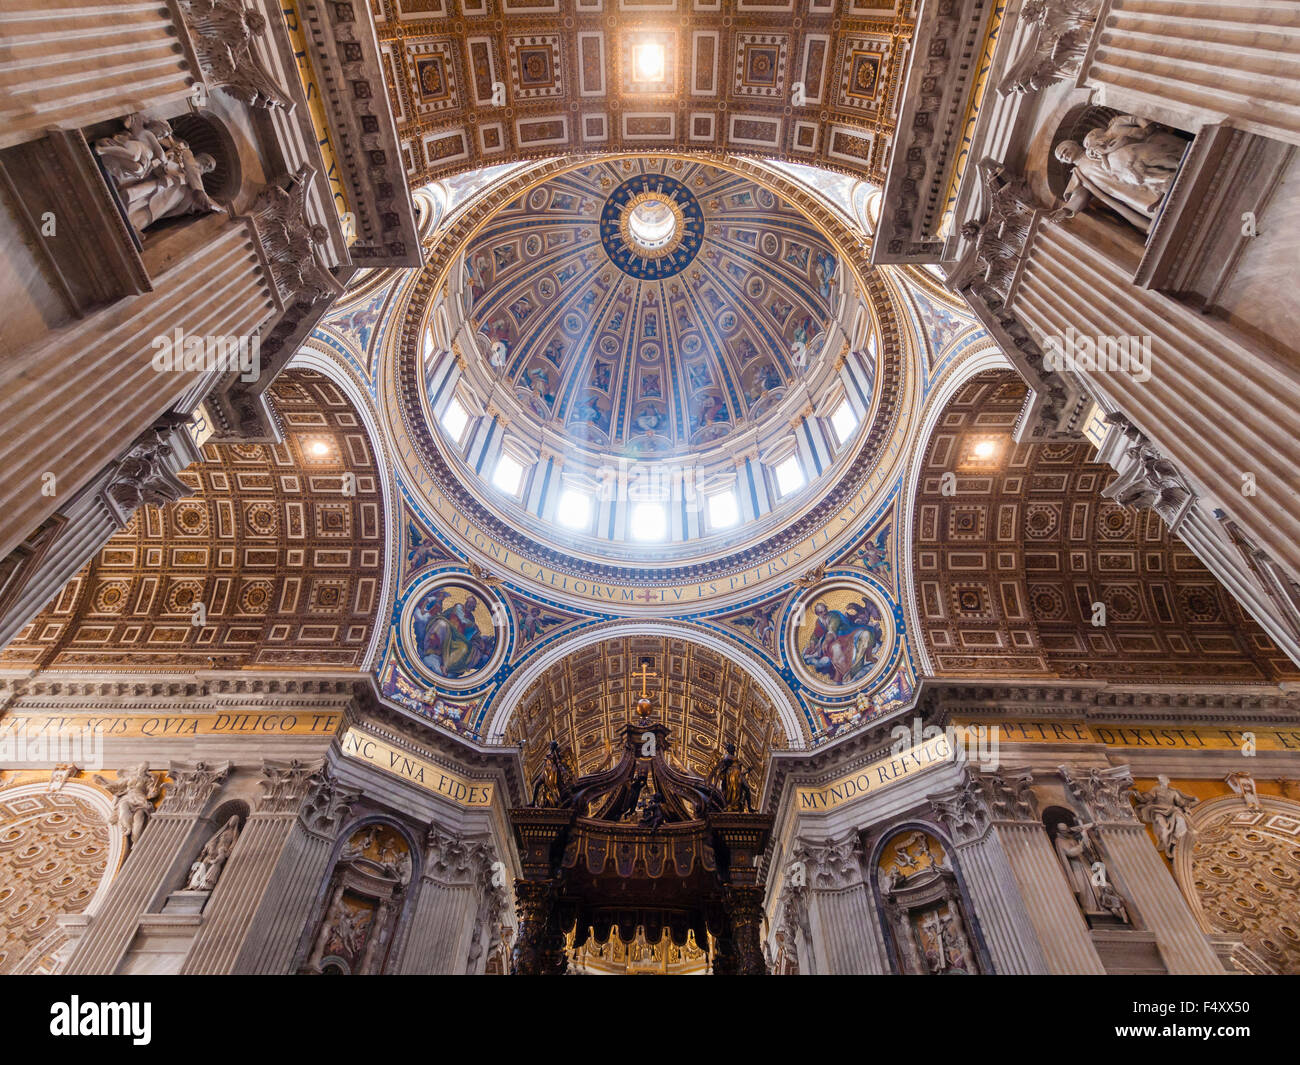 Interior of the Papal Basilica of St. Peter, Vatican: chancel with Bernini's baldacchino altar underneath the main dome. Stock Photo